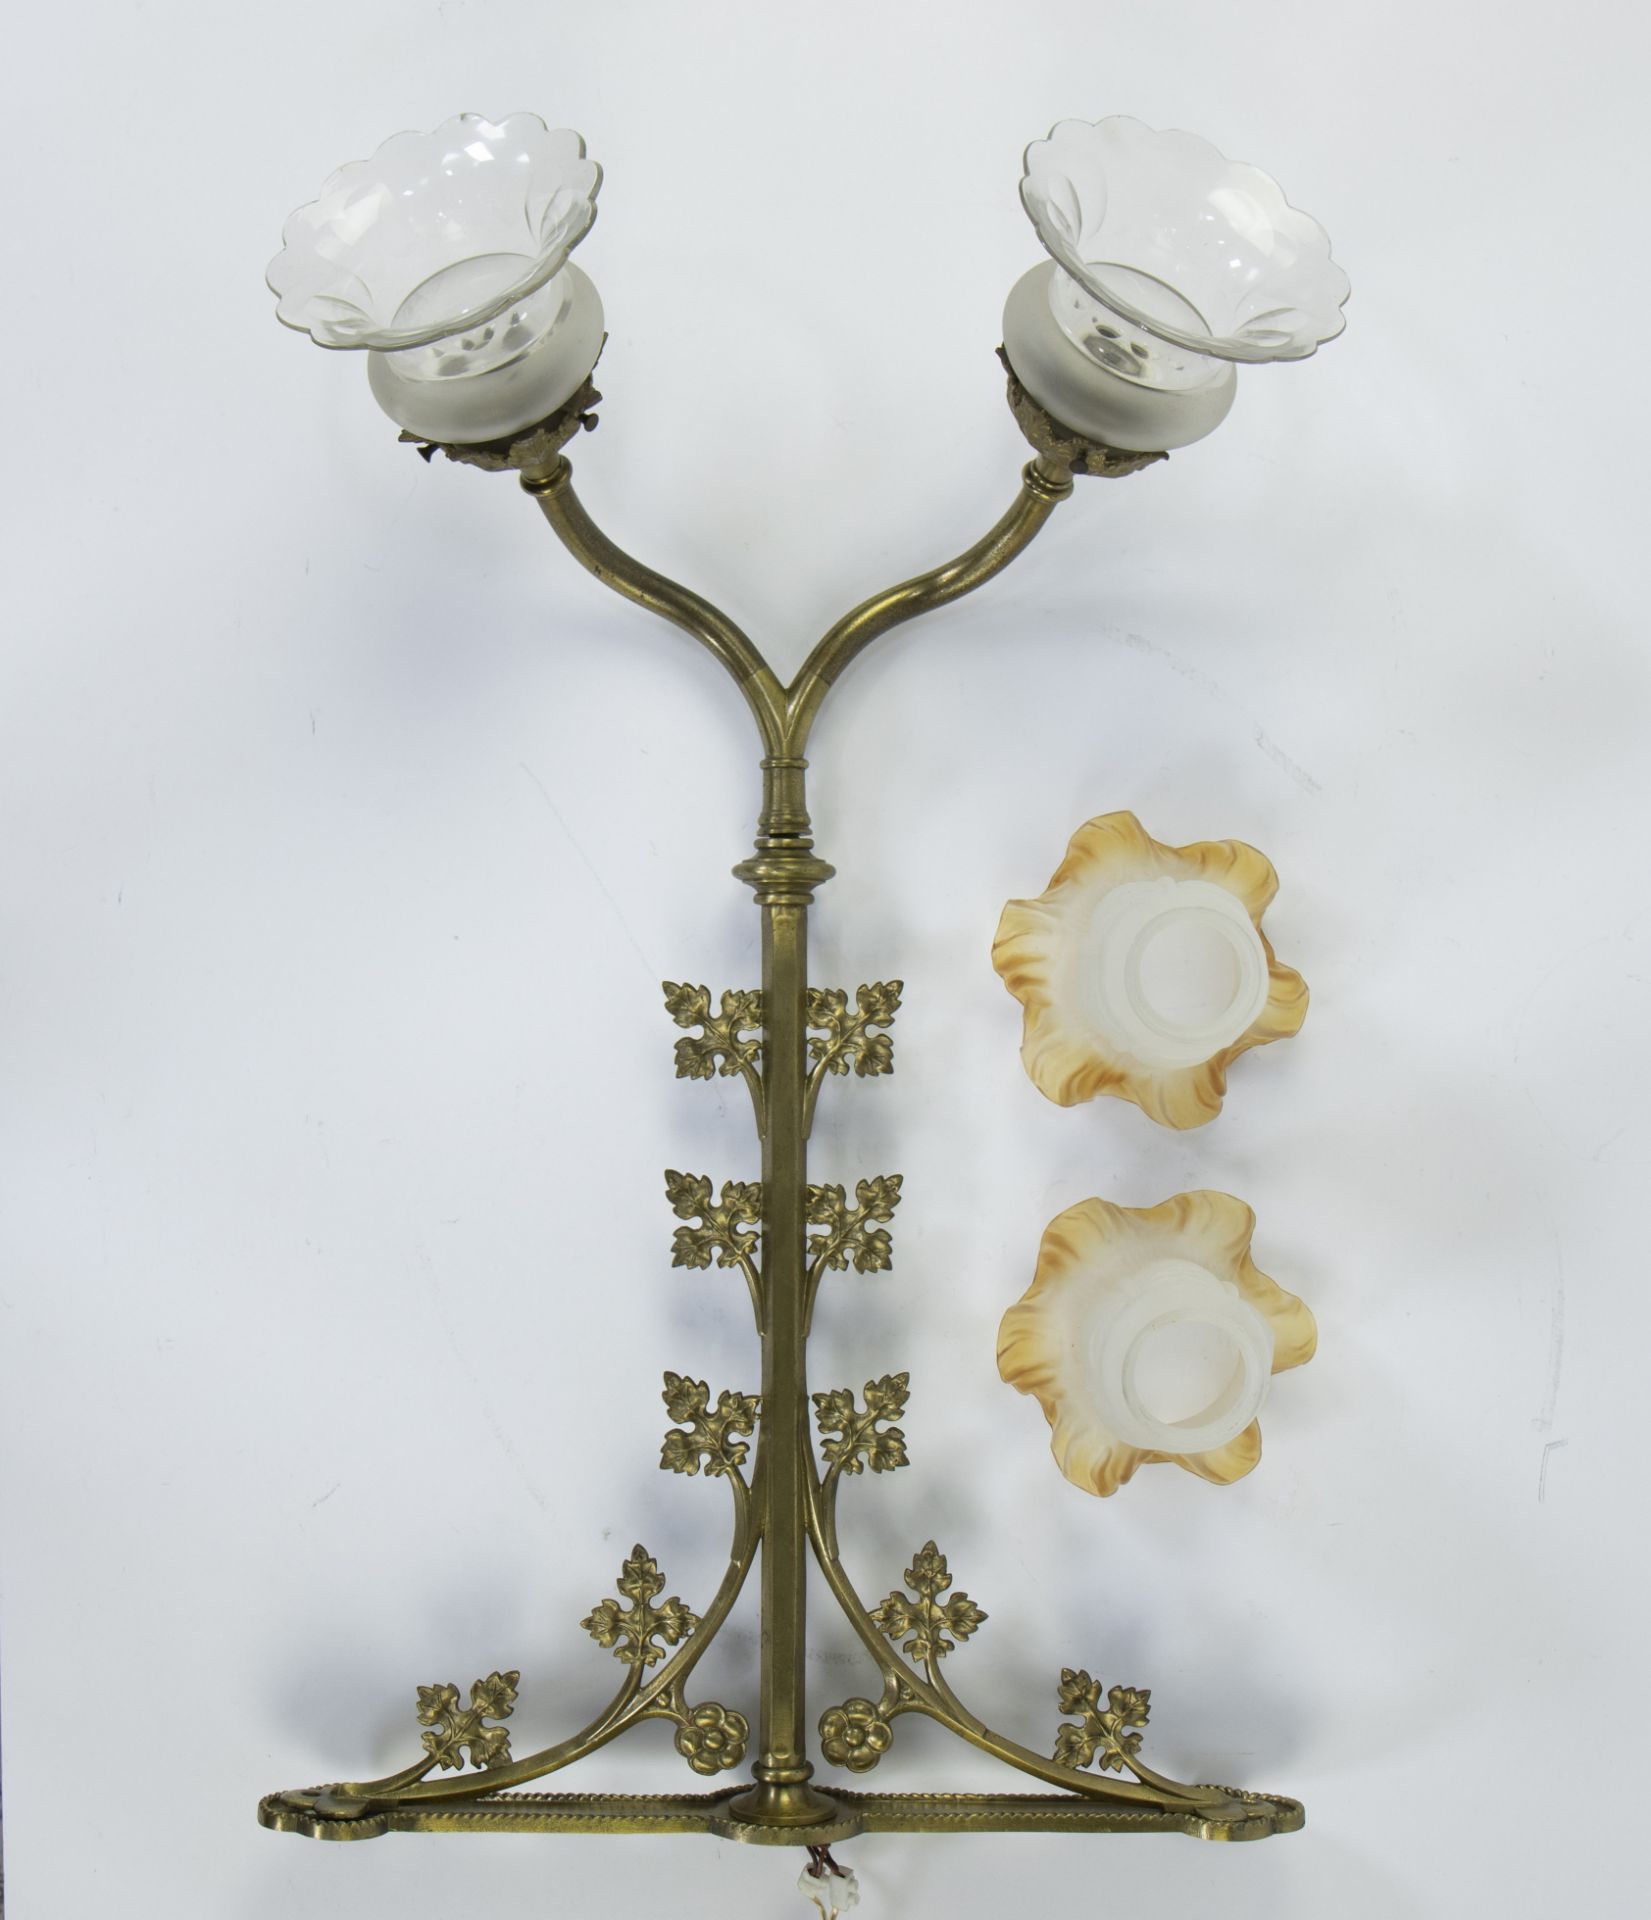 Collection of Art Nouveau chandelier with shades in yellow glass paste and 3 bronze wall fittings, m - Image 3 of 3